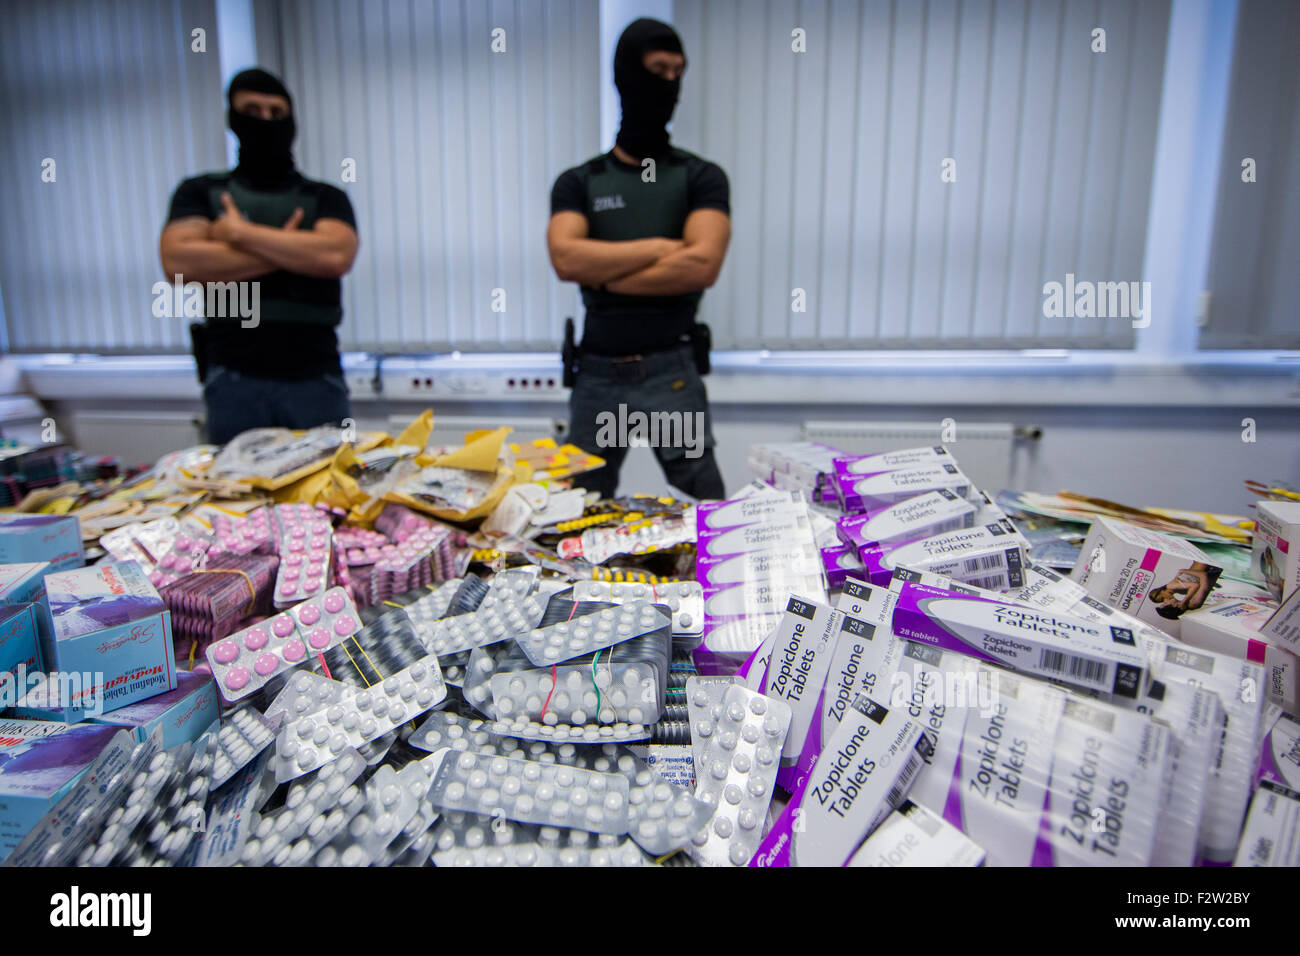 Customs investigators stand behind a table loaded with illegal pharmaceuticals at the customs office in Essen, Germany, 24 September 2015. Customs officials have uncovered a flourishing trade in illegal pharmaceuticals in the Ruhr area. PHOTO: ROLF VENNENBERND/DPA Stock Photo